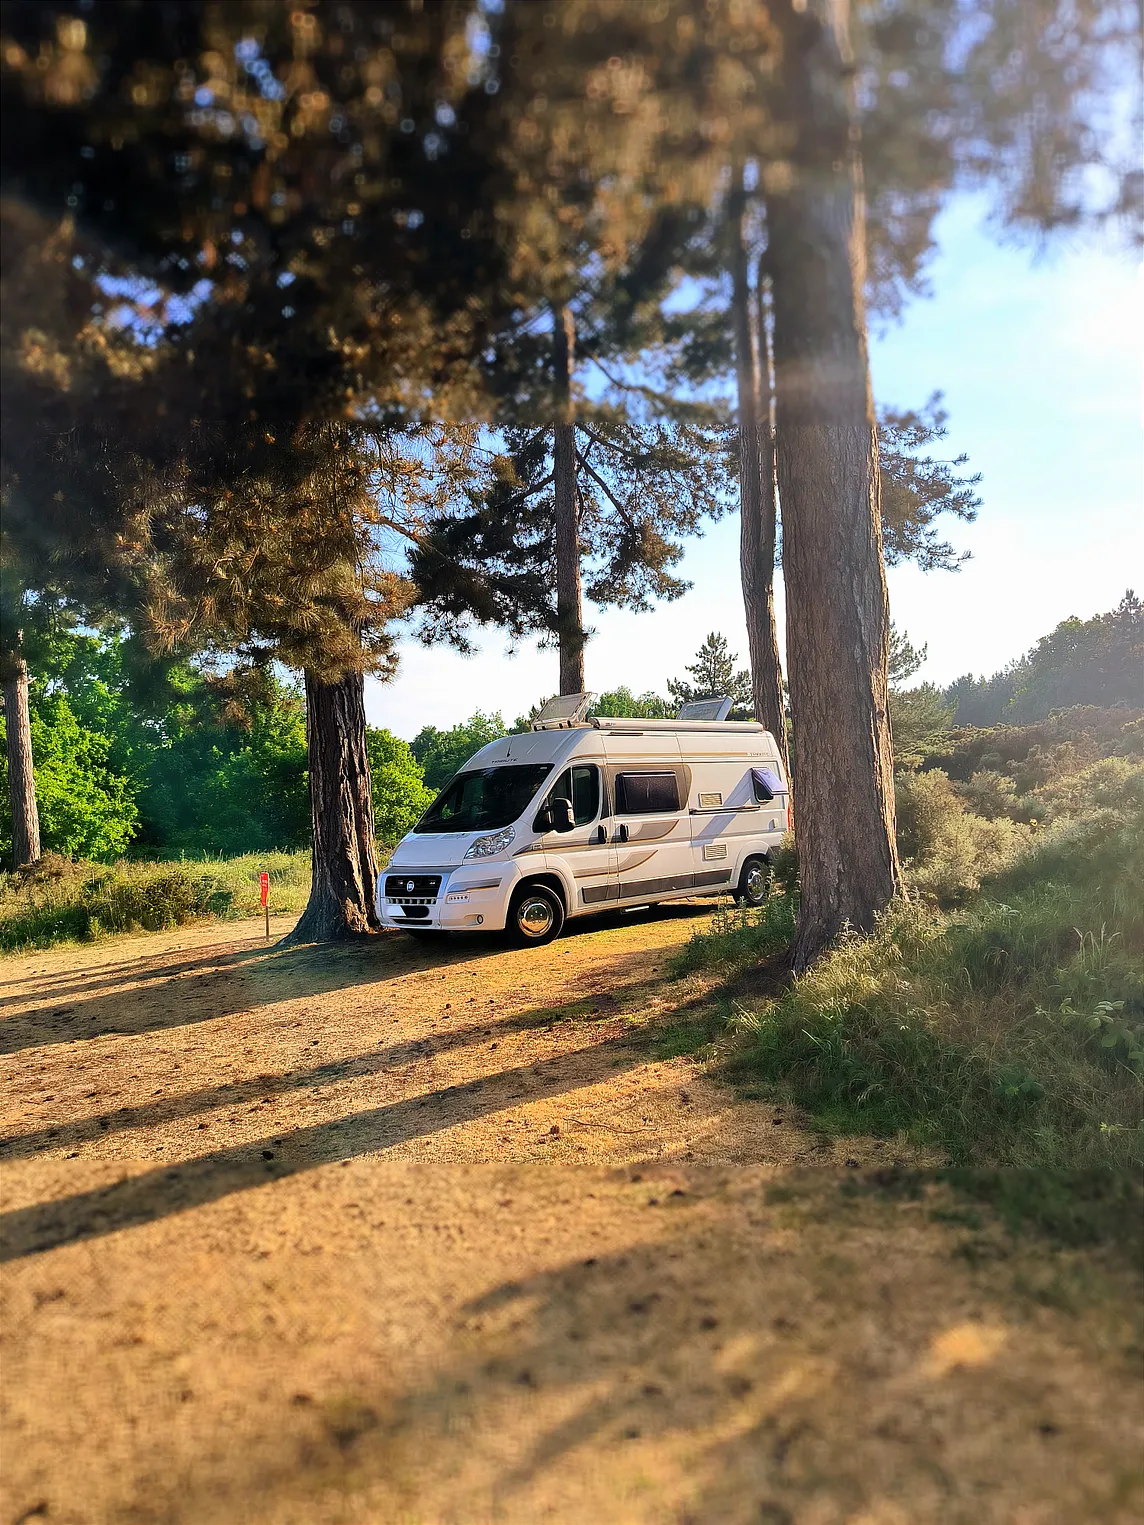 Campervan underneath the trees in the sunset